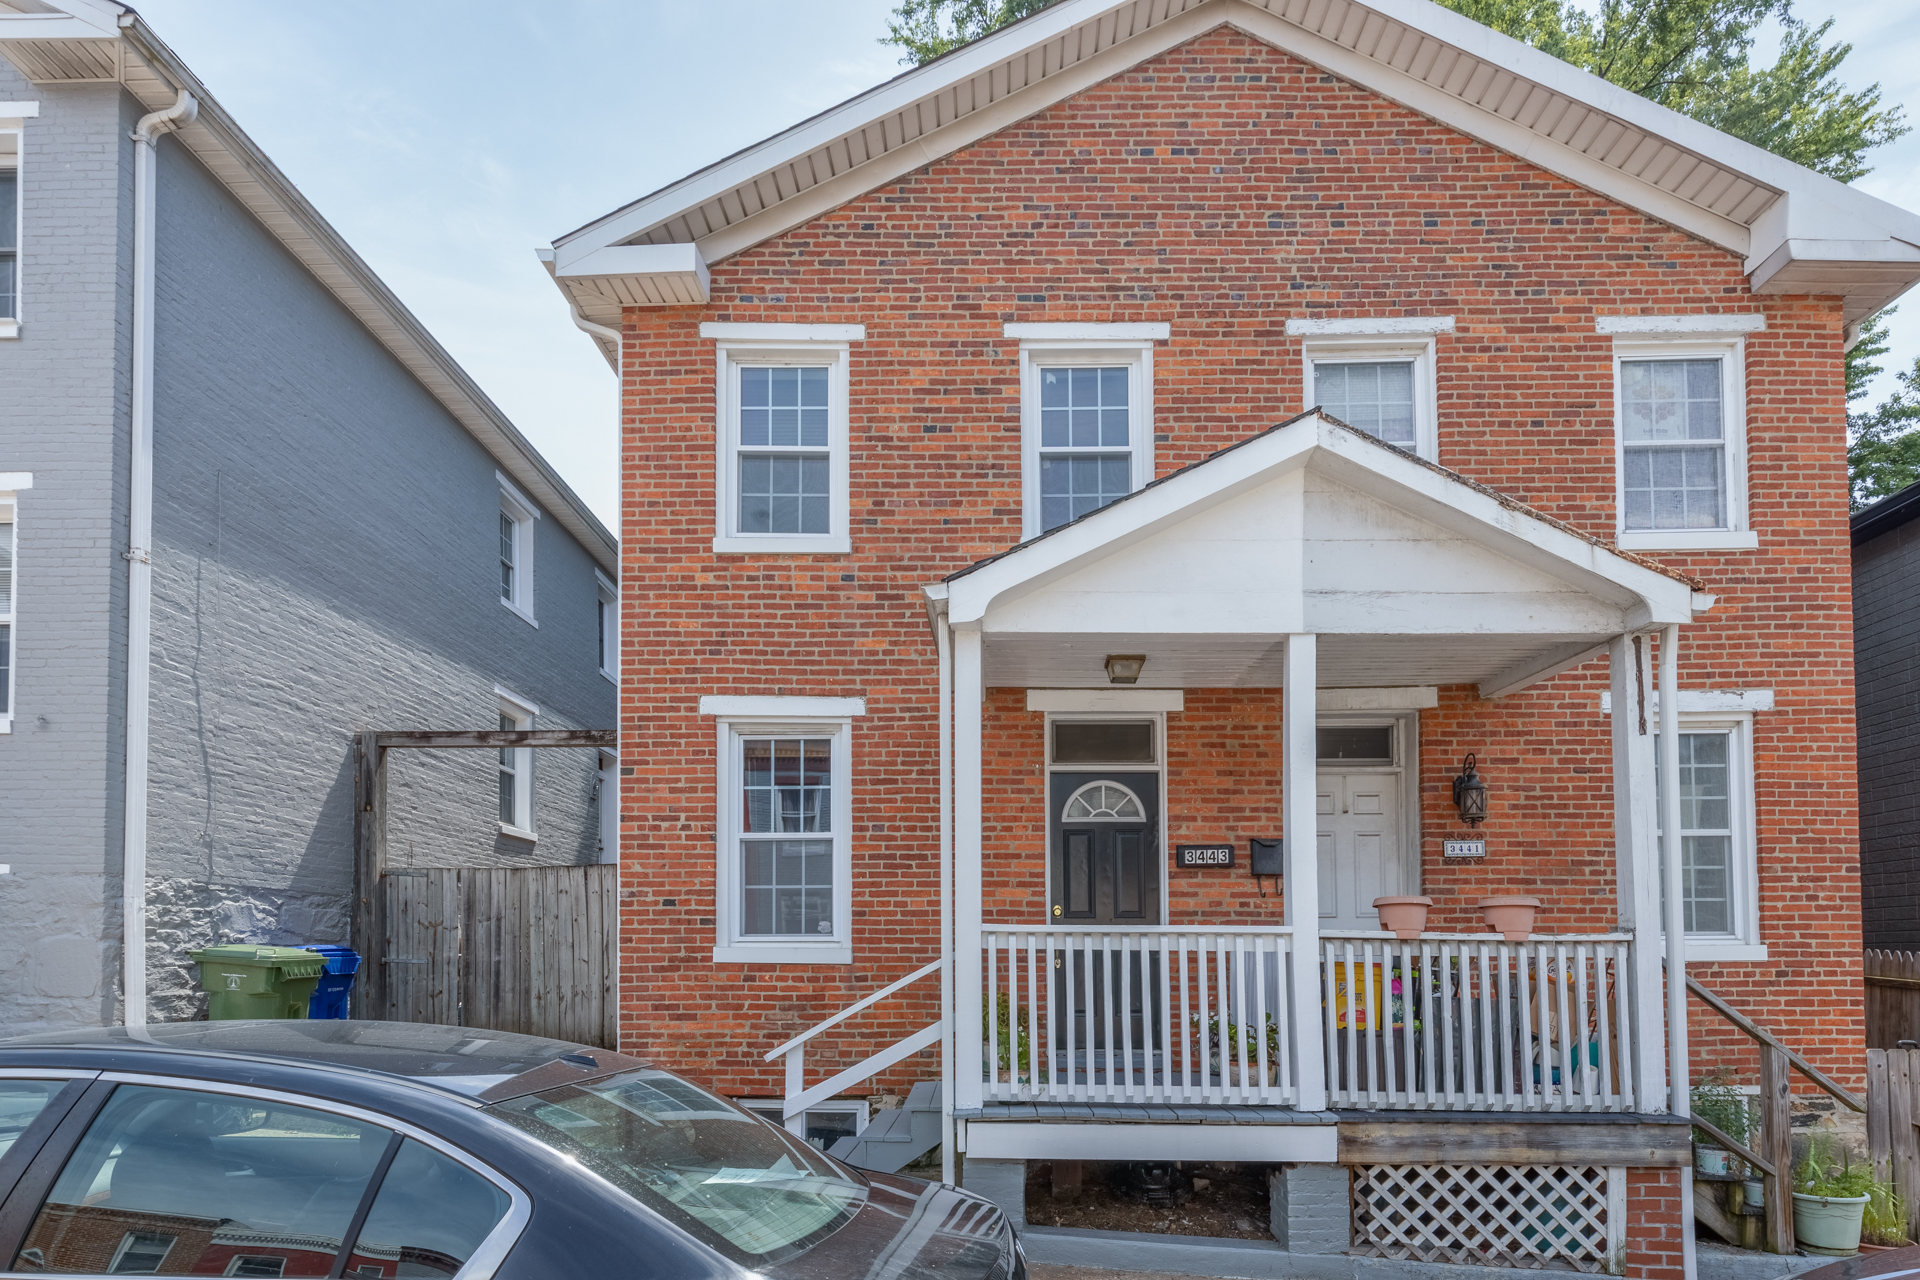 SOLD / 3443 Ash St / Baltimore MD 21211